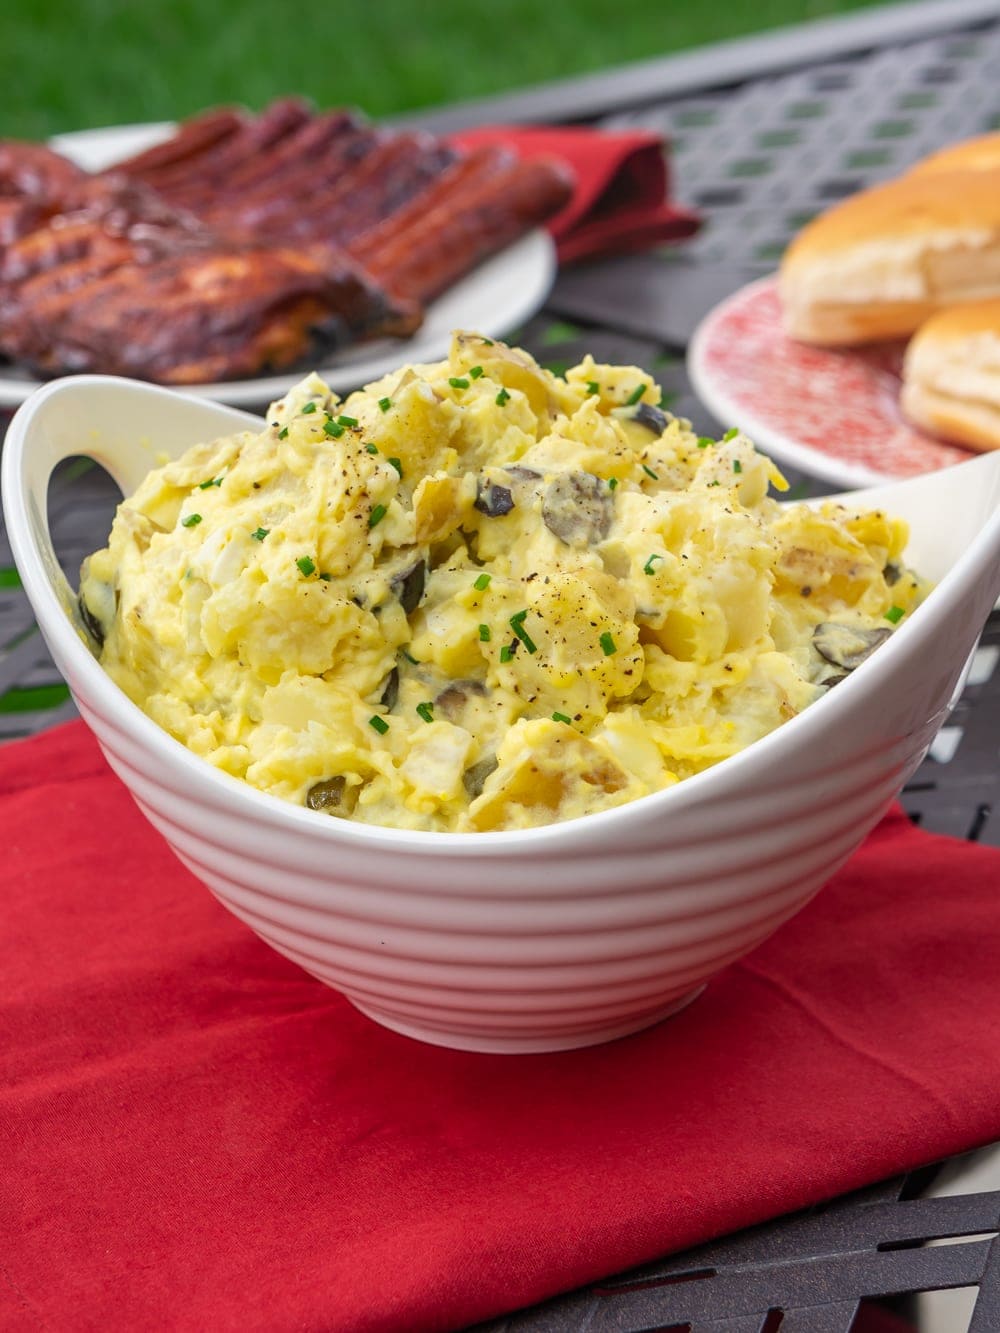 A bowl of potato salad outside with ribs, hot dogs and buns